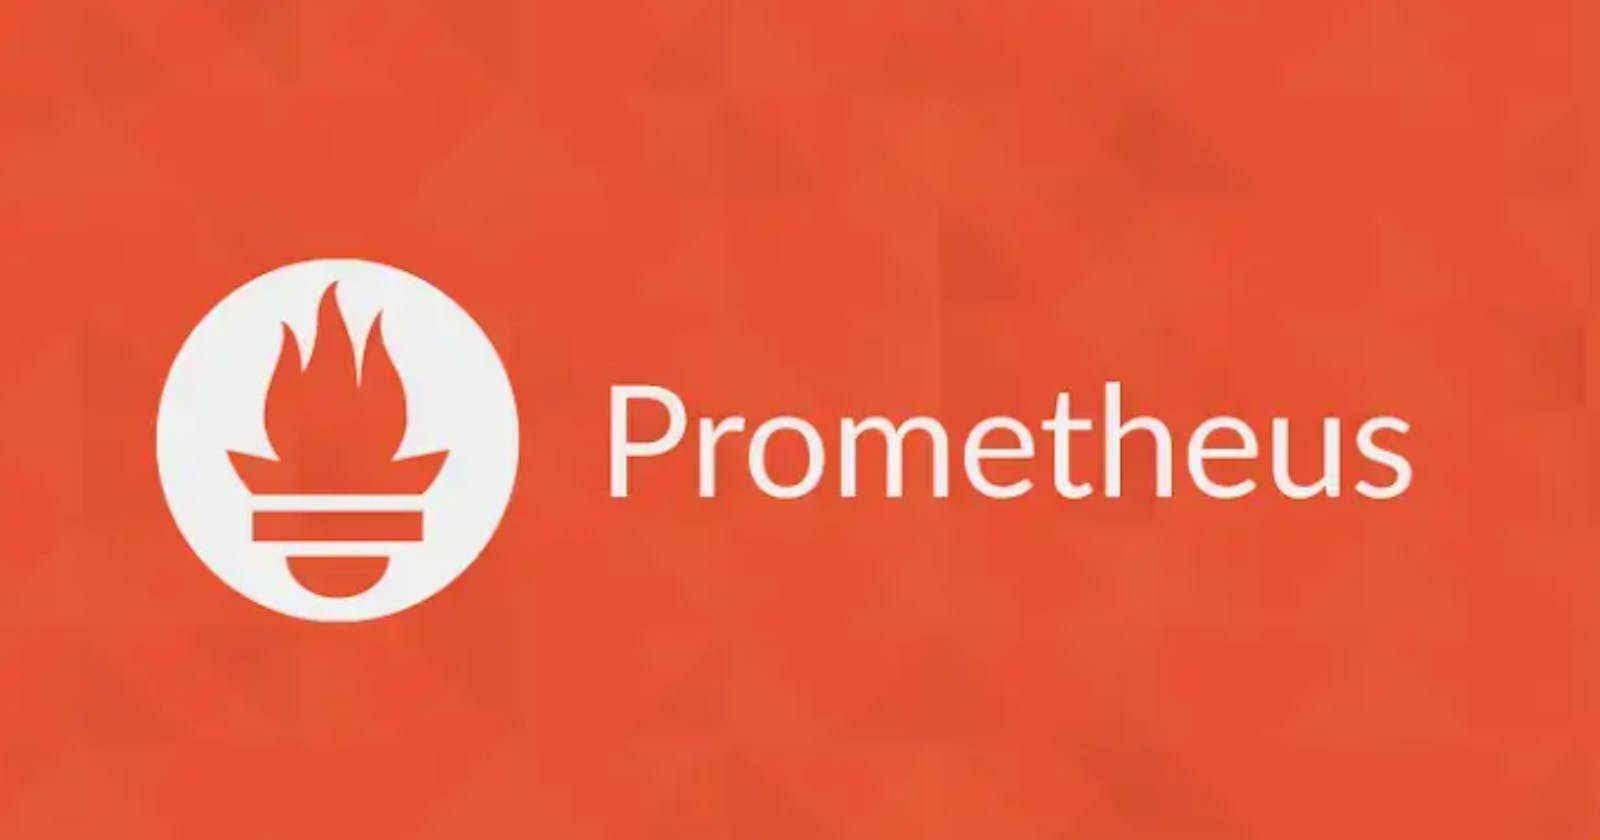 Prometheus - Your Monitoring Solution